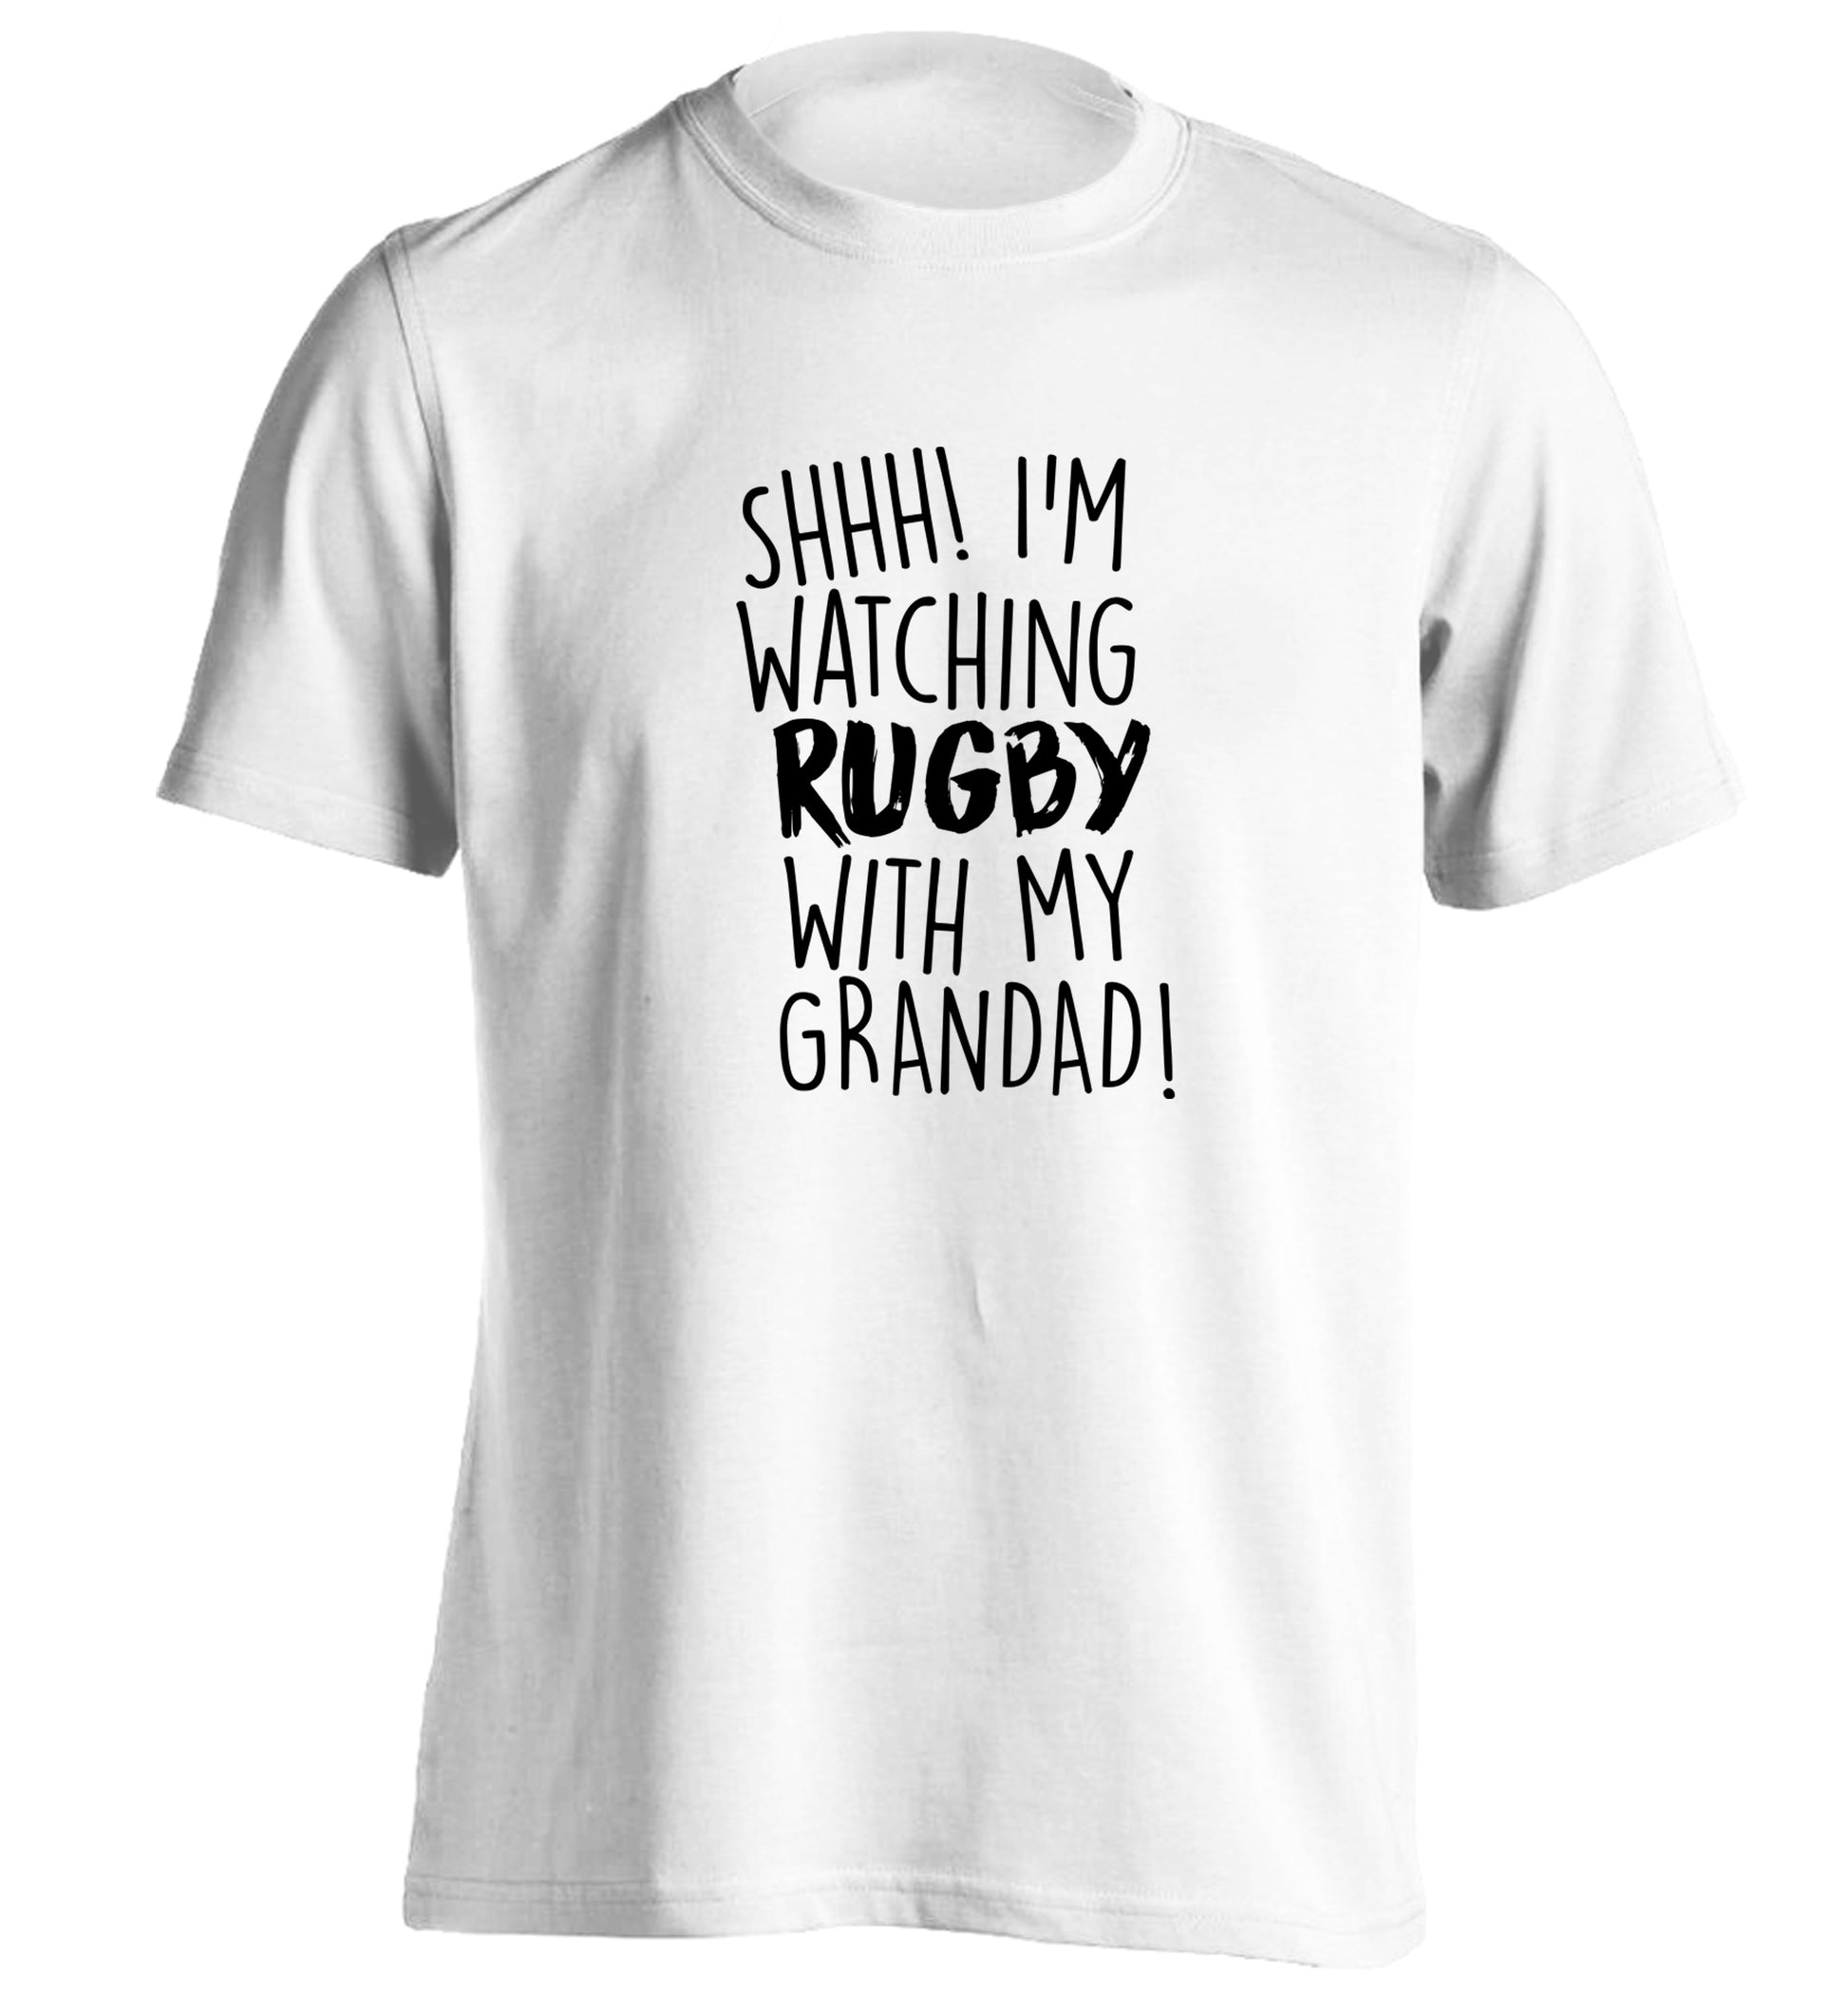 Shh I'm watching rugby with my grandad adults unisex white Tshirt 2XL